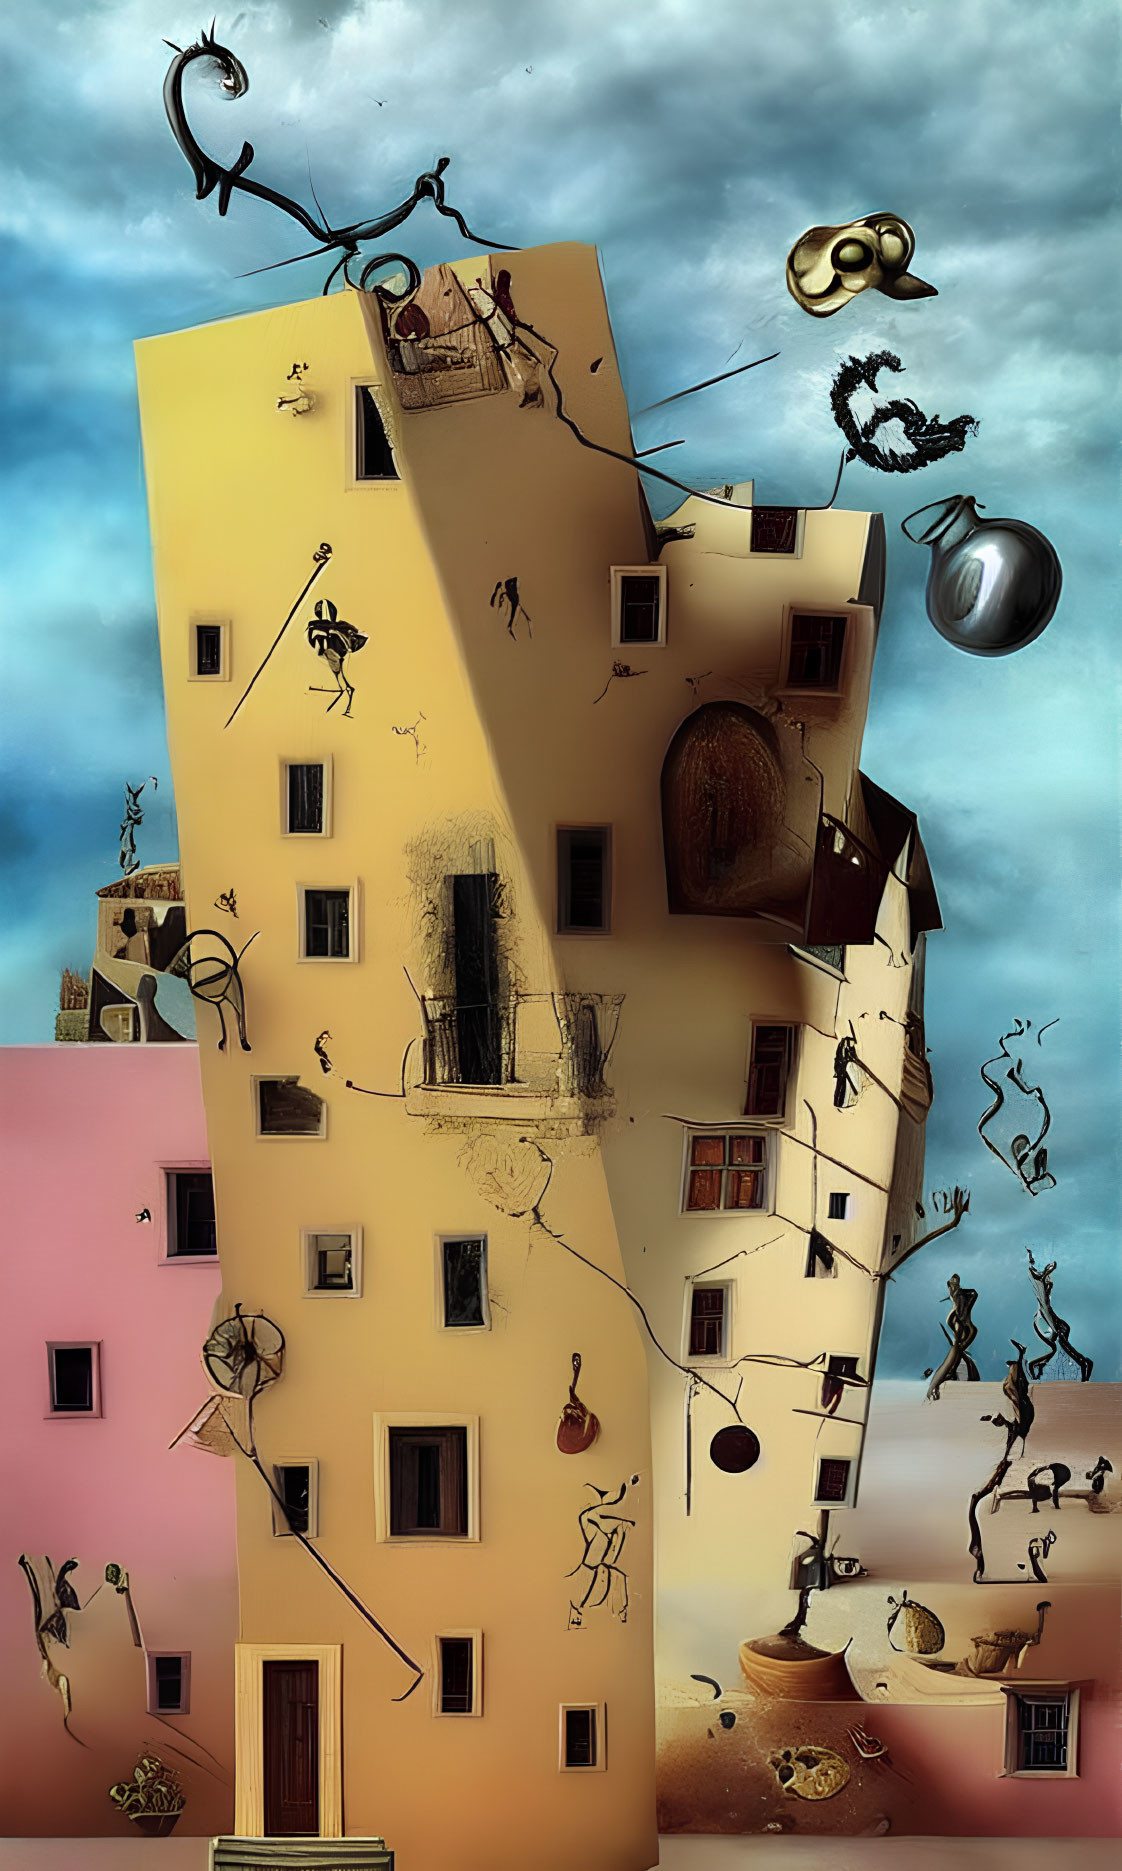 Distorted building with whimsical characters defying gravity